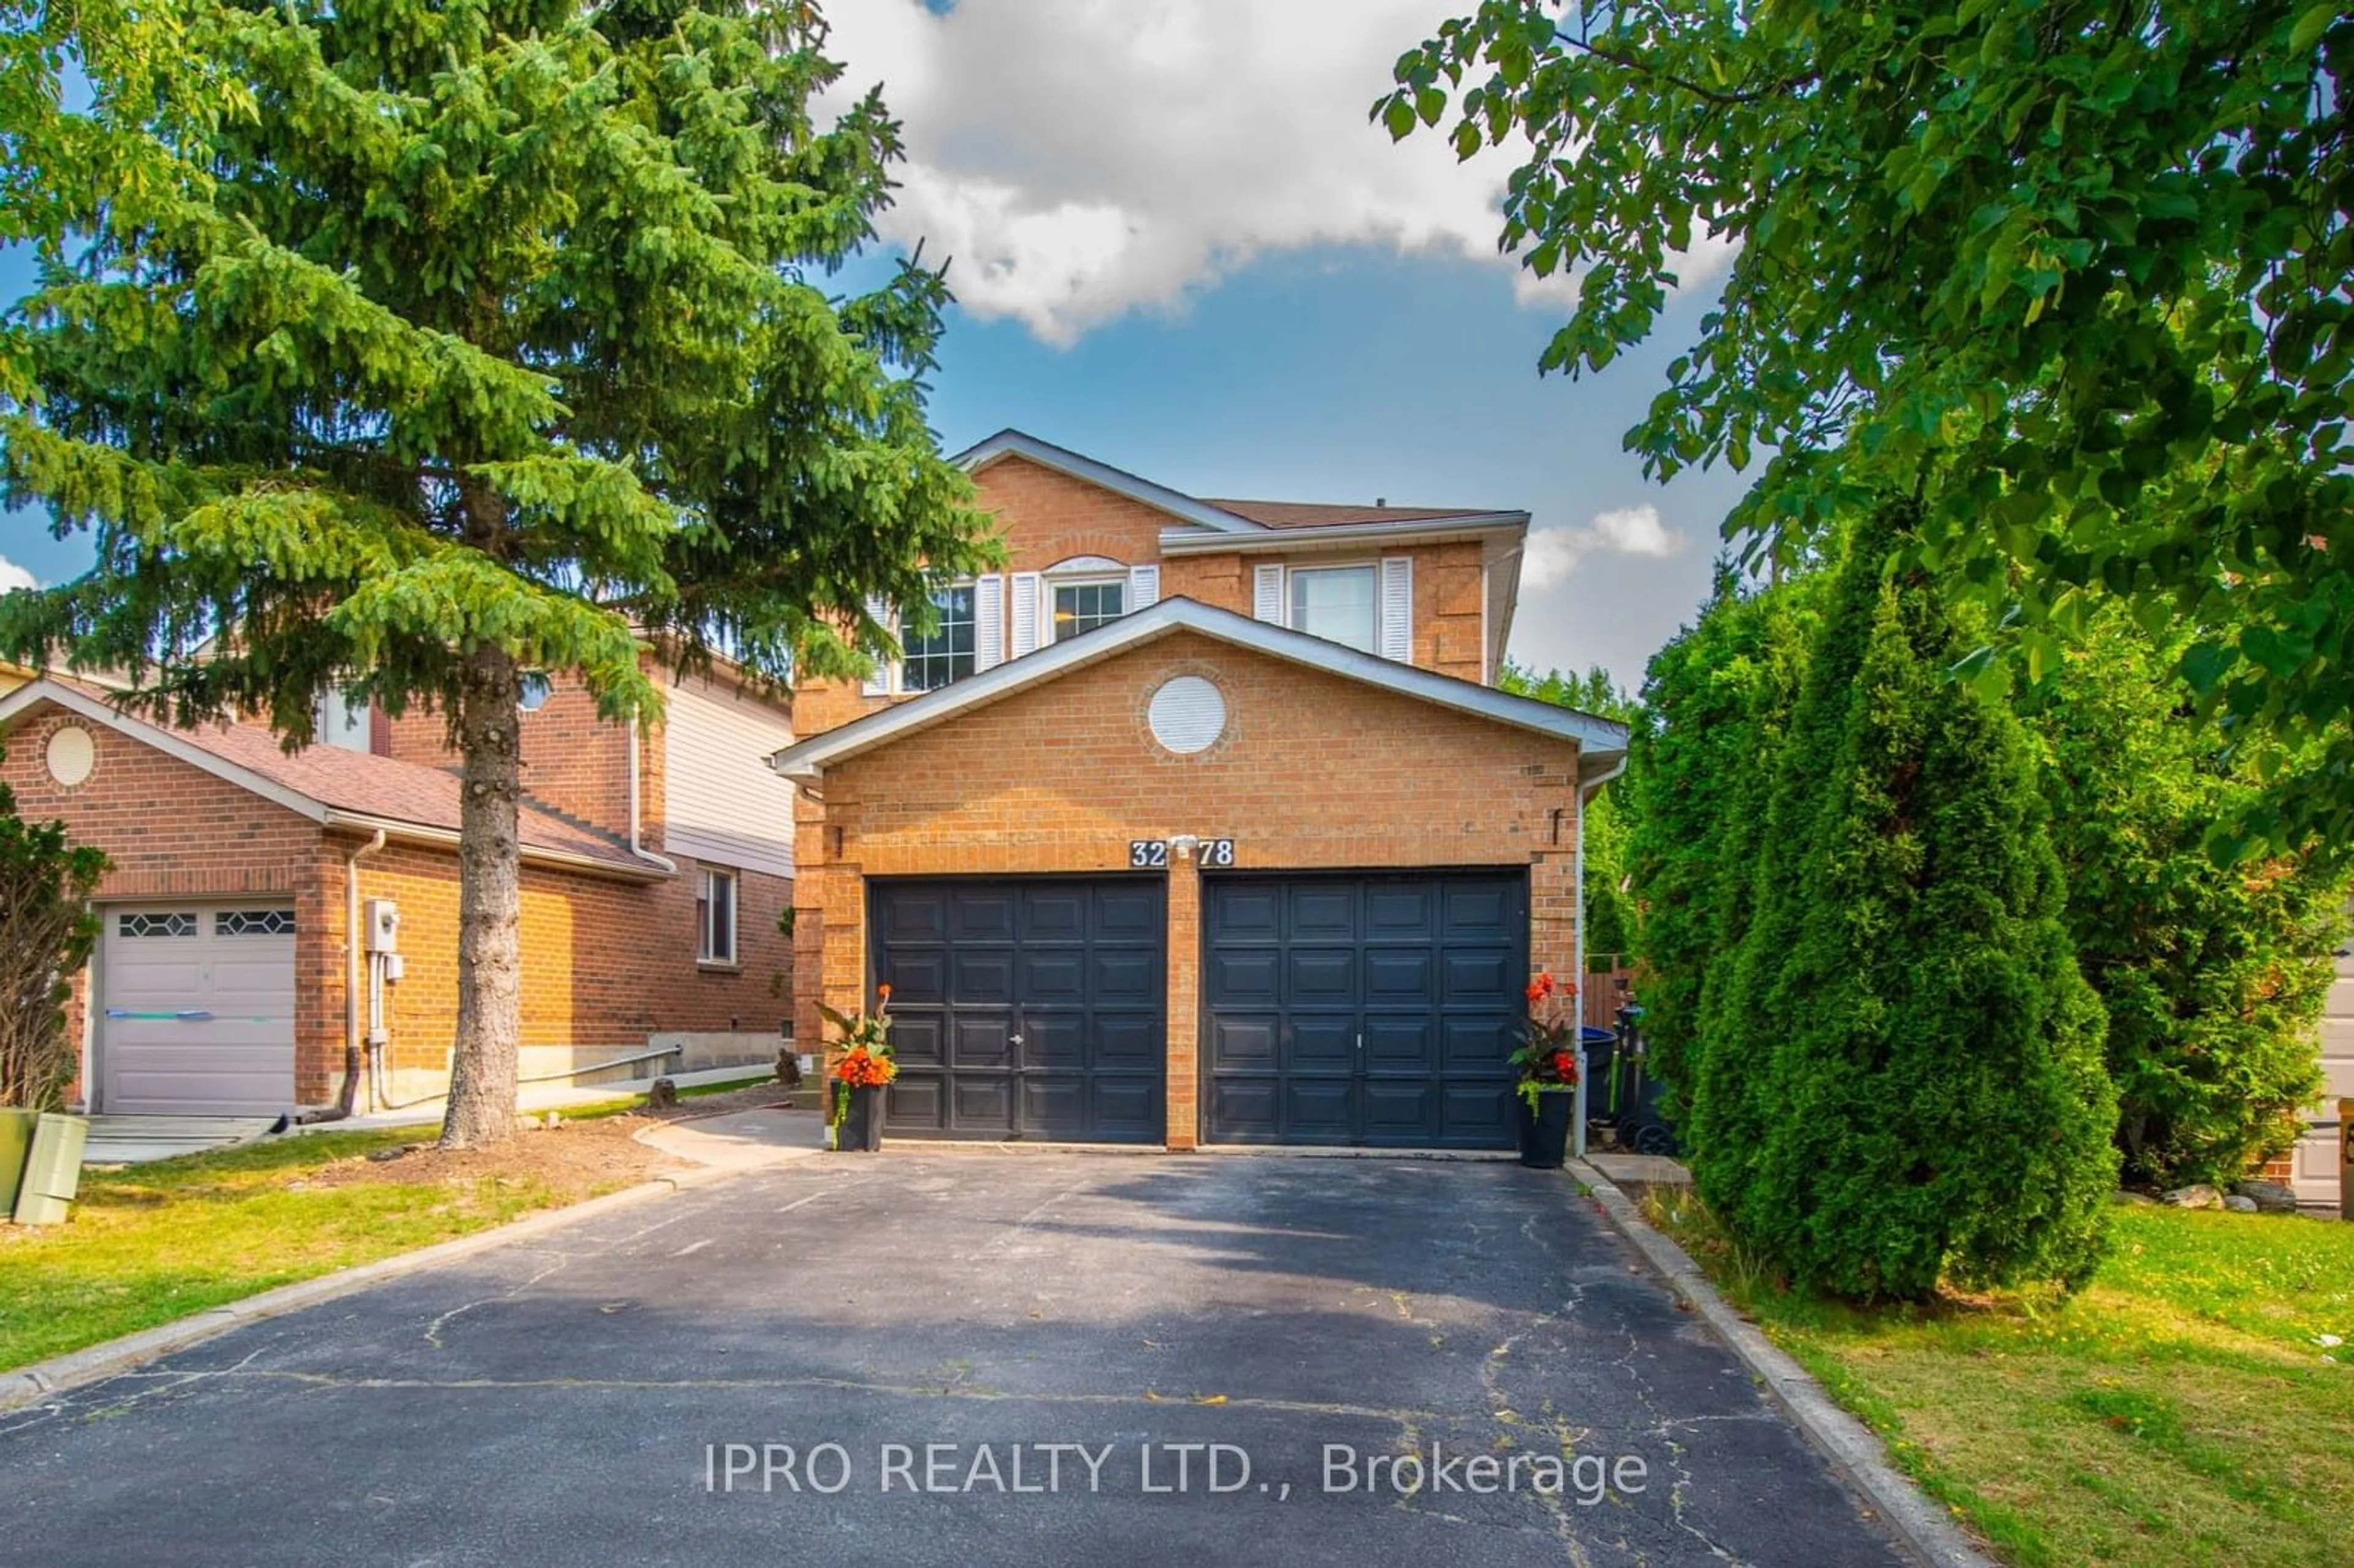 Frontside or backside of a home for 3278 Wilmar Cres, Mississauga Ontario L5L 4B3